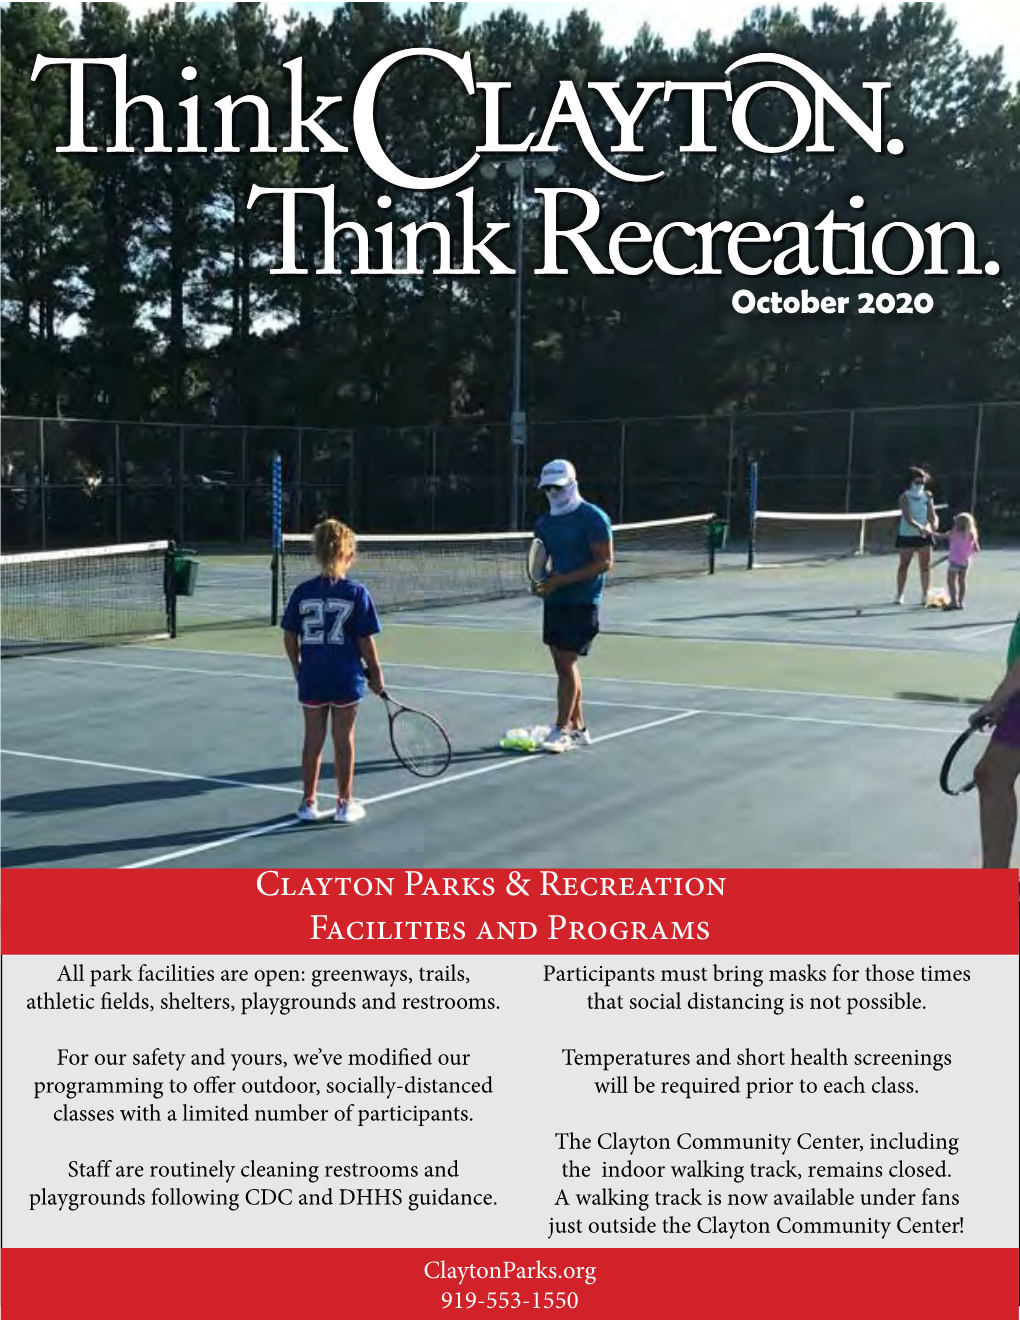 Clayton Parks & Recreation Facilities and Programs